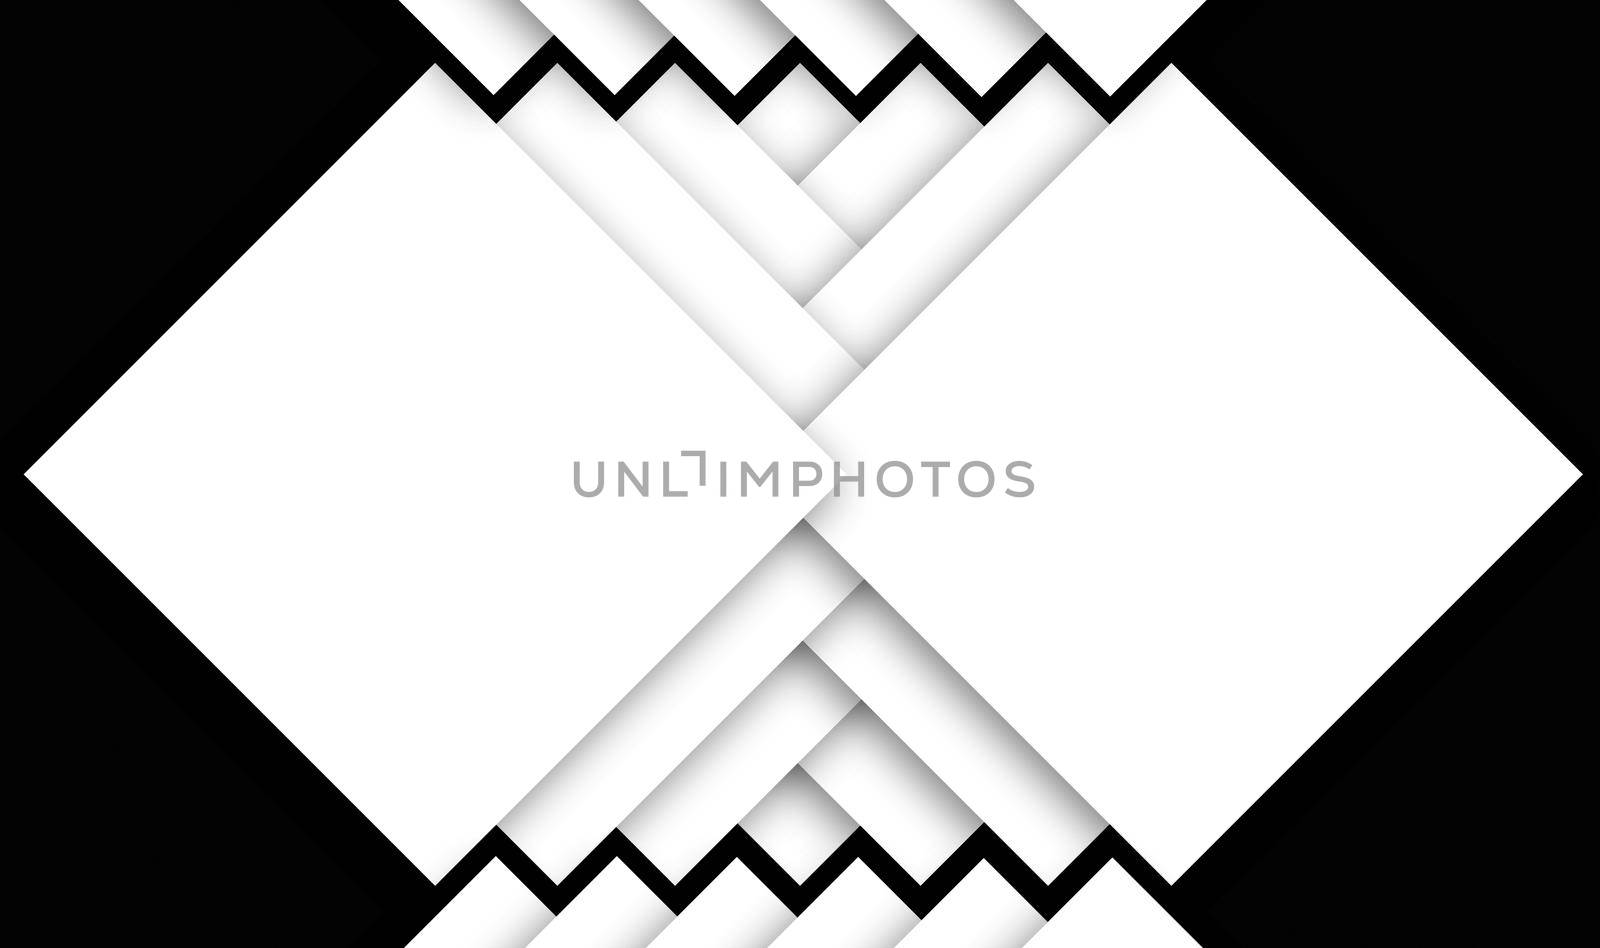 Tilted square shapes and zig zag and gray isolated color stock photo Pentagon - Shape, Abstract, At The Edge Of, Backgrounds, Black And White by tabishere